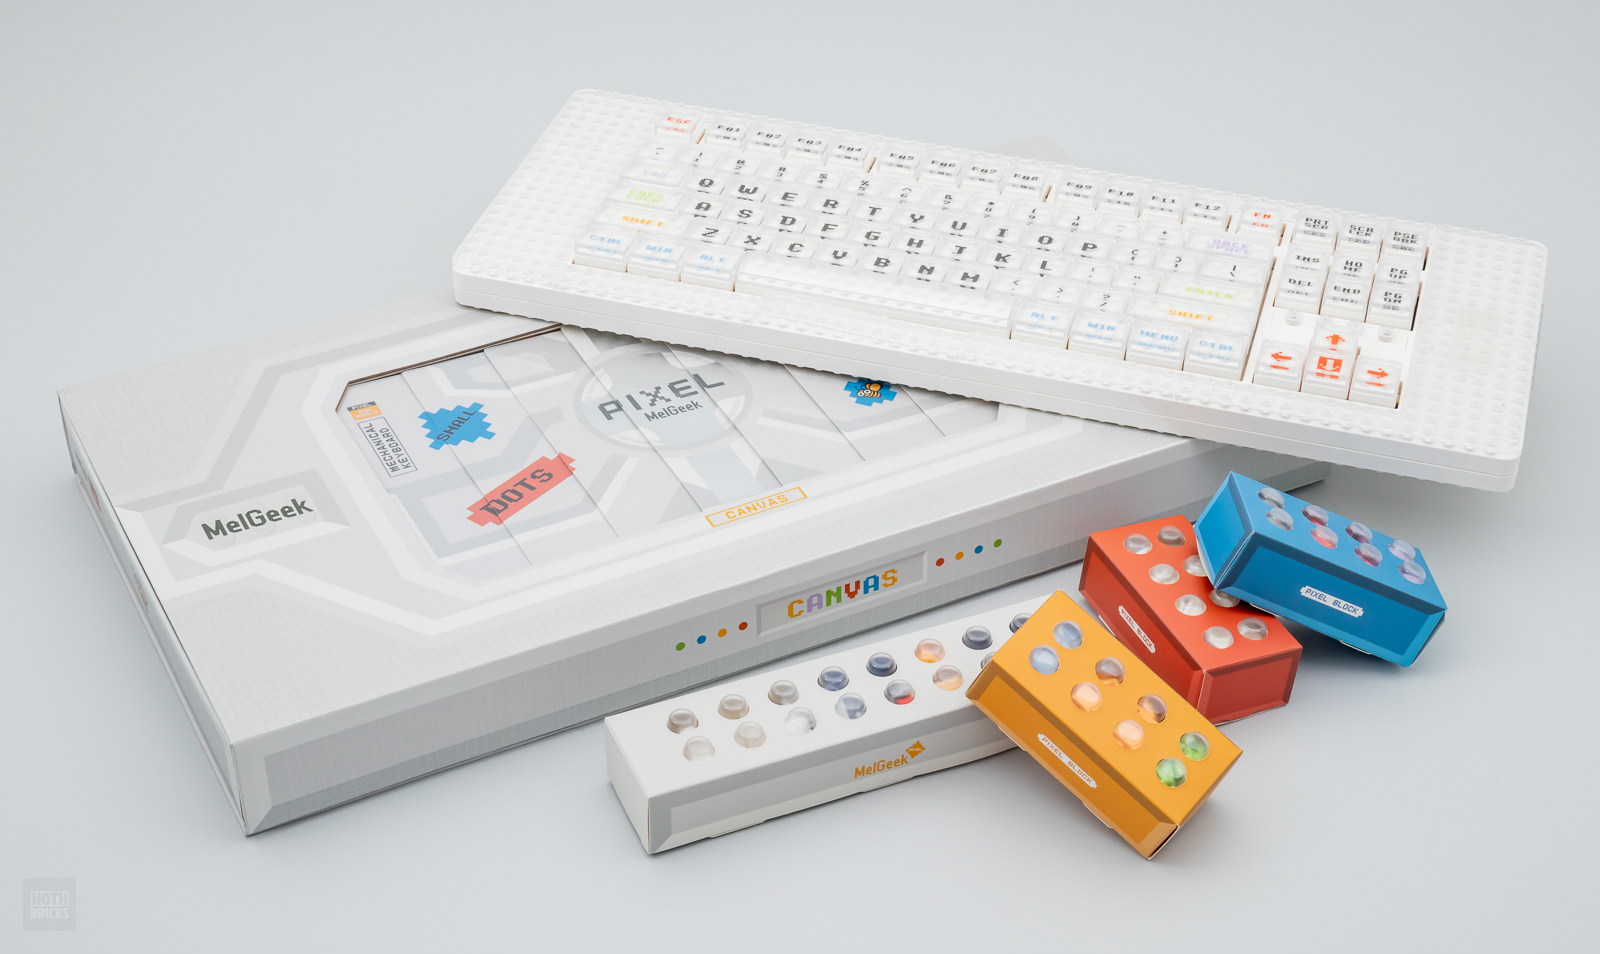 Lego-Compatible Mechanical Keyboard Works With Your Own Bricks